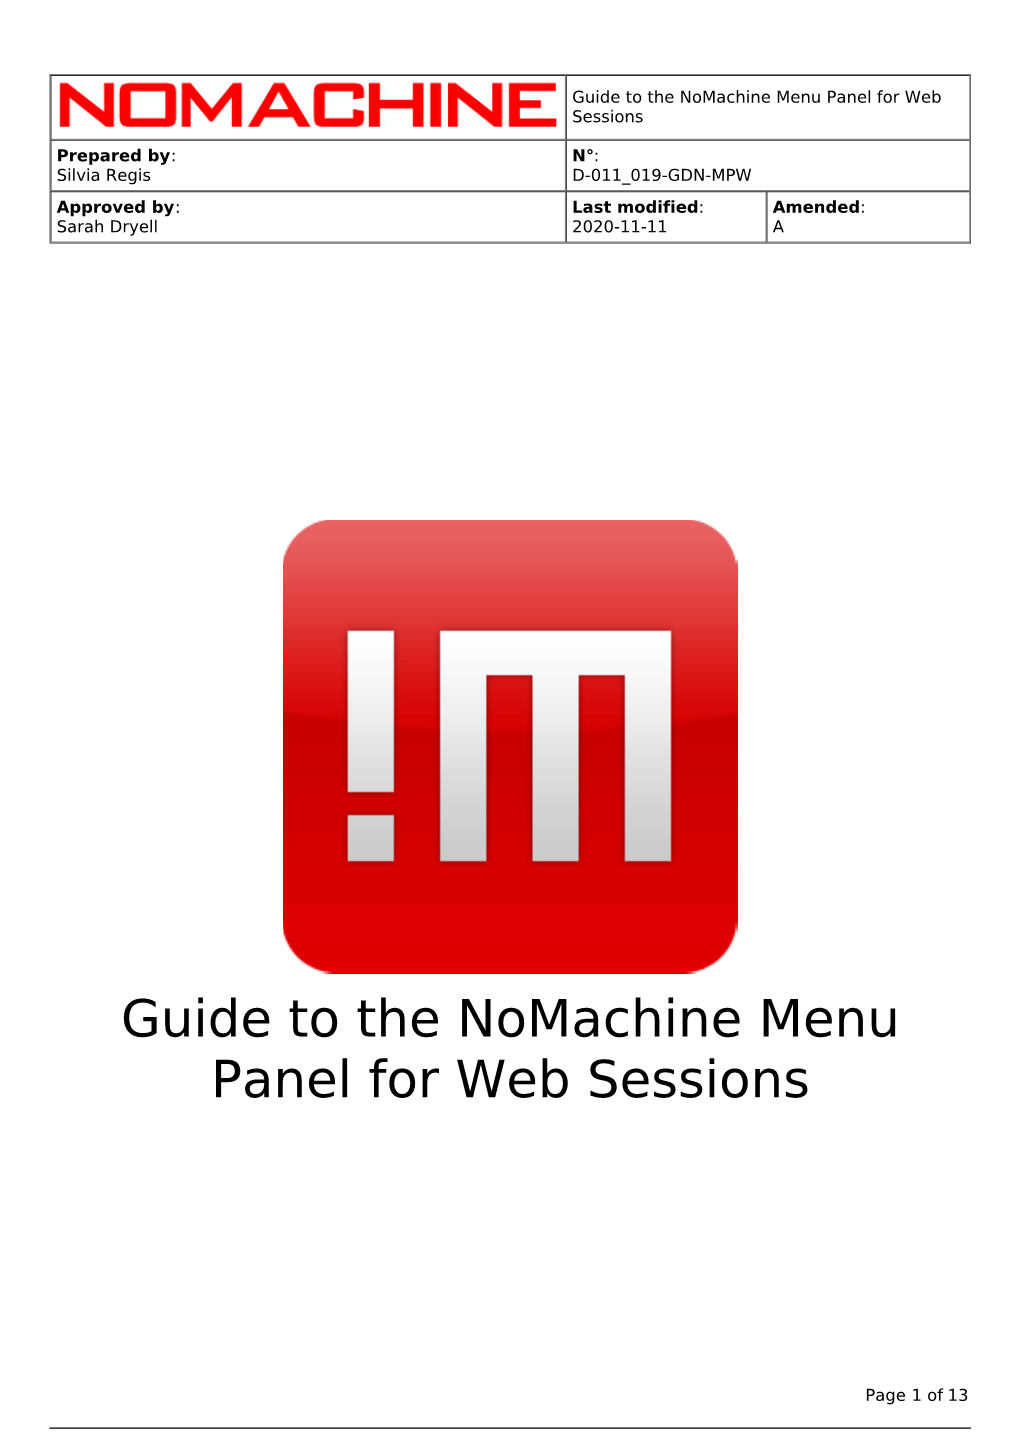 Guide to the Nomachine Menu Panel for Web Sessions